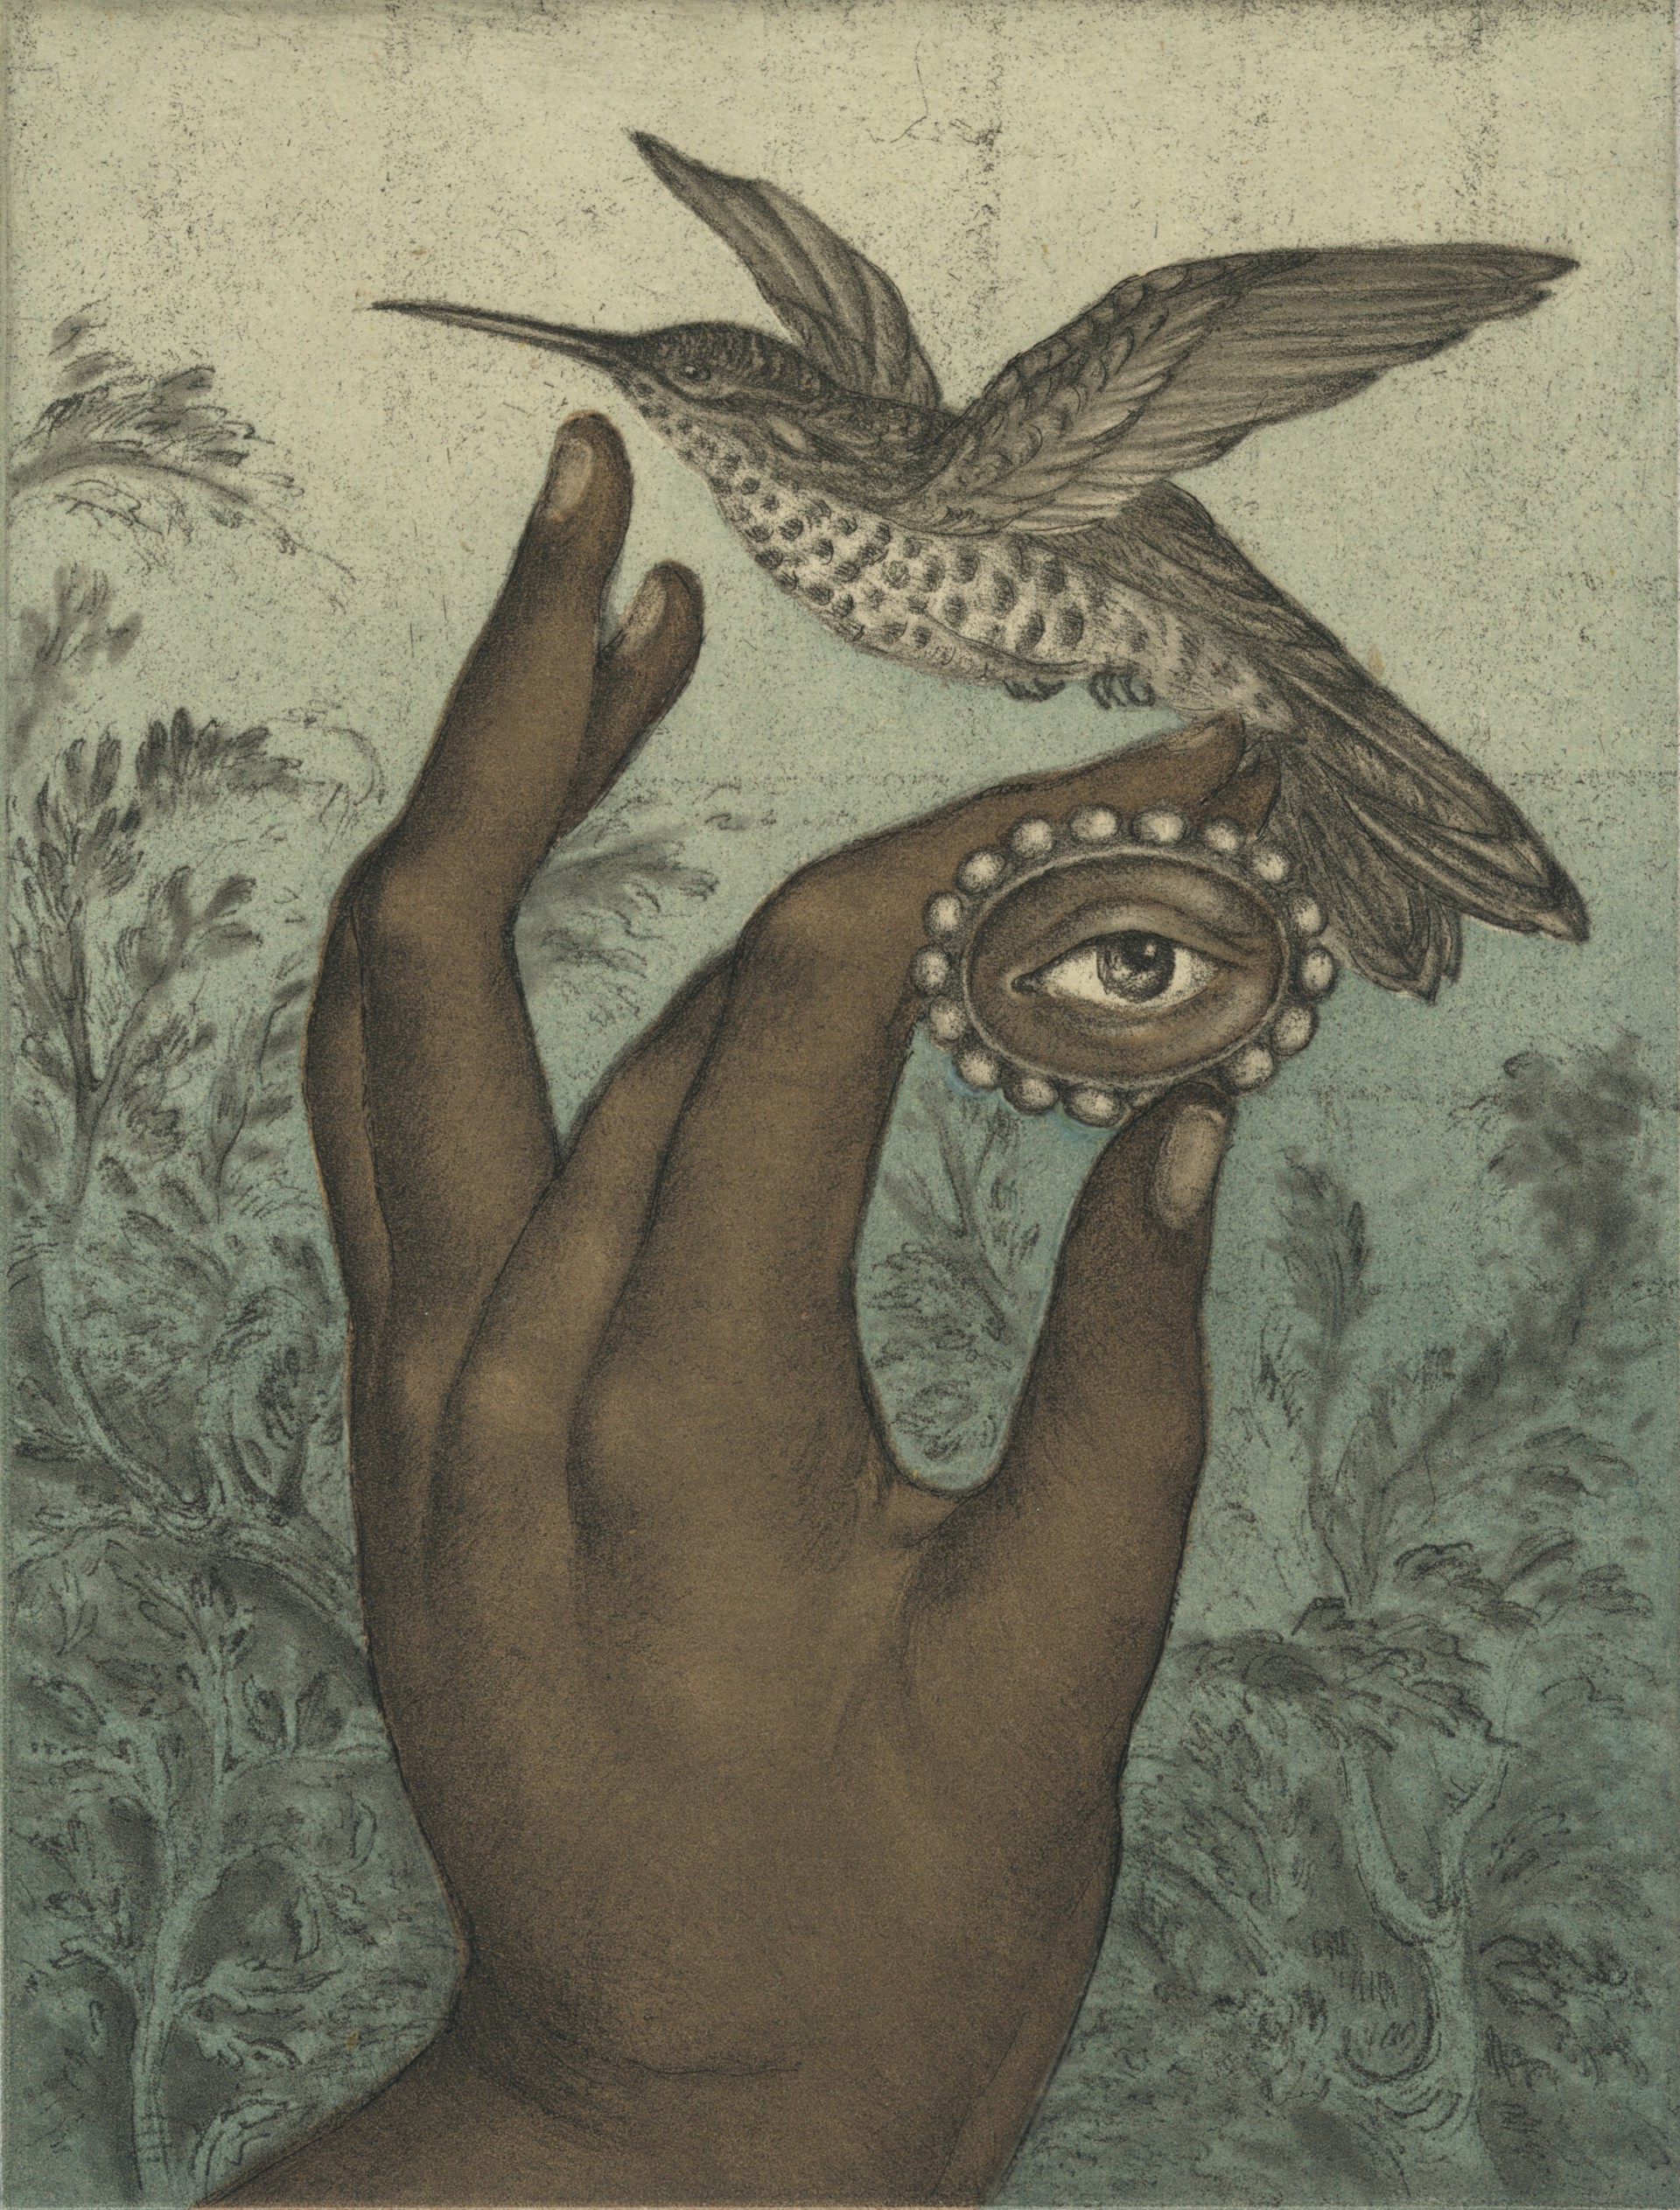 Hand with Hummingbird and Lover’s Eye by Fatima Ronquillo